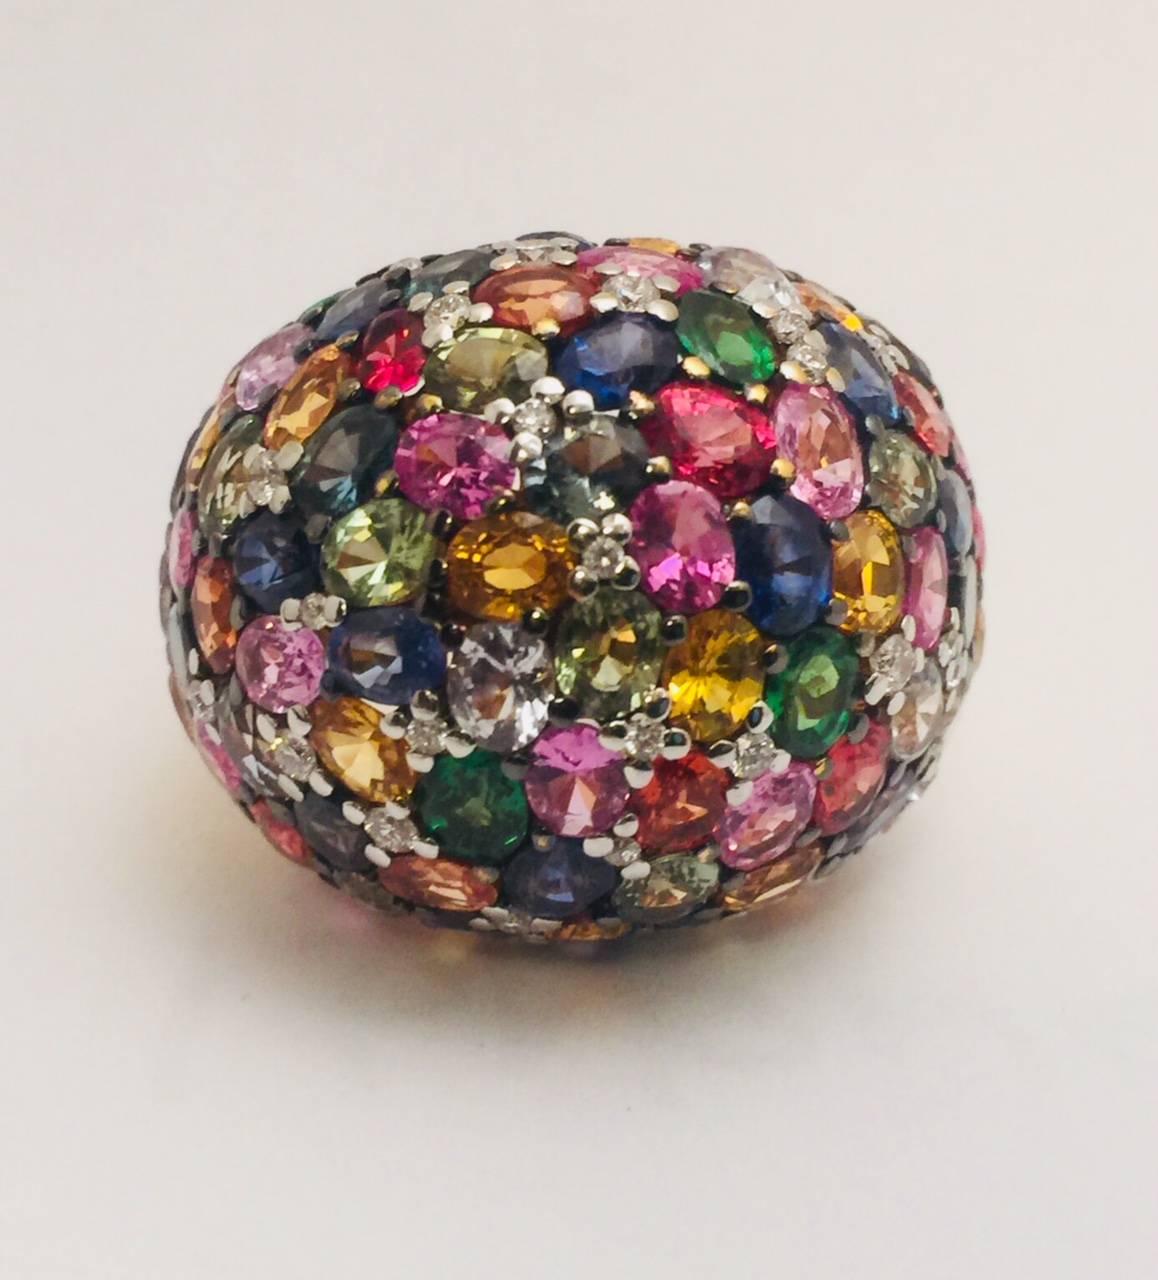 Sparkle more than the lights!  Fabricated in 18 karat yellow gold, this dramatic dome ring is encrusted with every color sapphire imaginable!   Each oval, faceted sapphire shares prongs for a seamless appearance.  Impressive combined total weight of